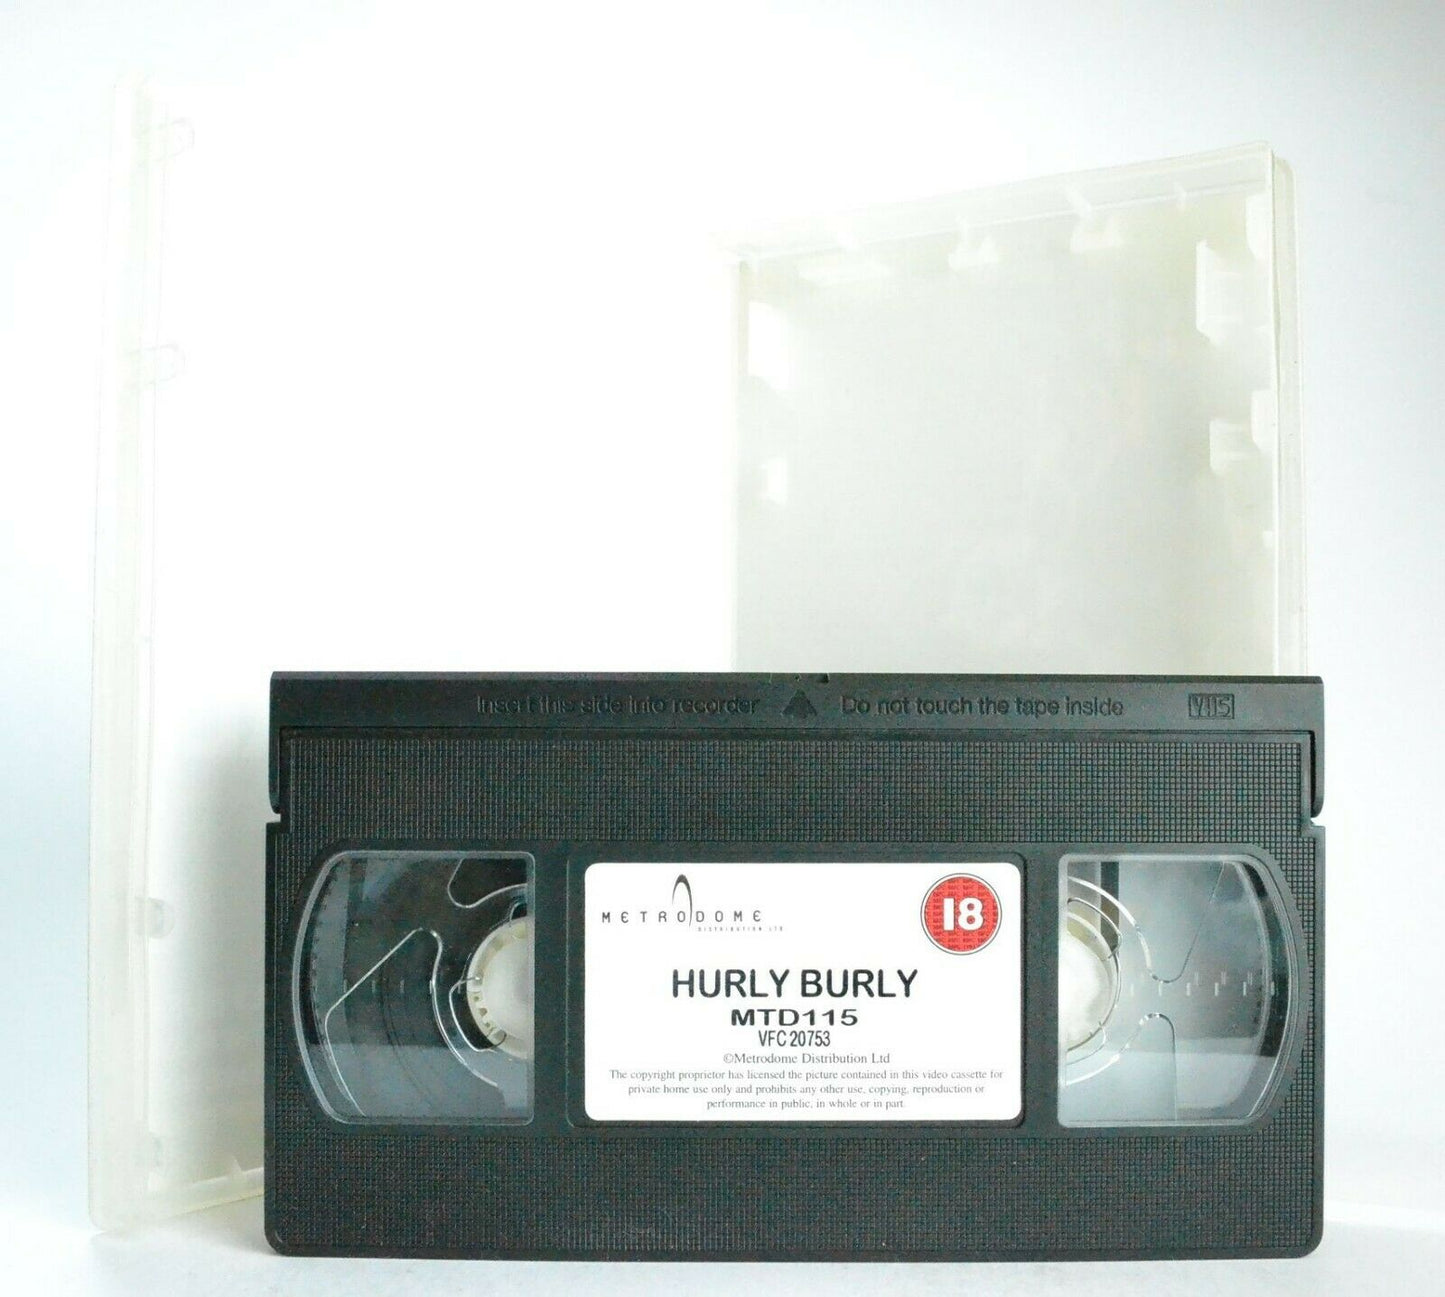 Hurly Burly: Drama (1998) - Large Box - Sex, Drugs And Hedonism - S.Penn - VHS-